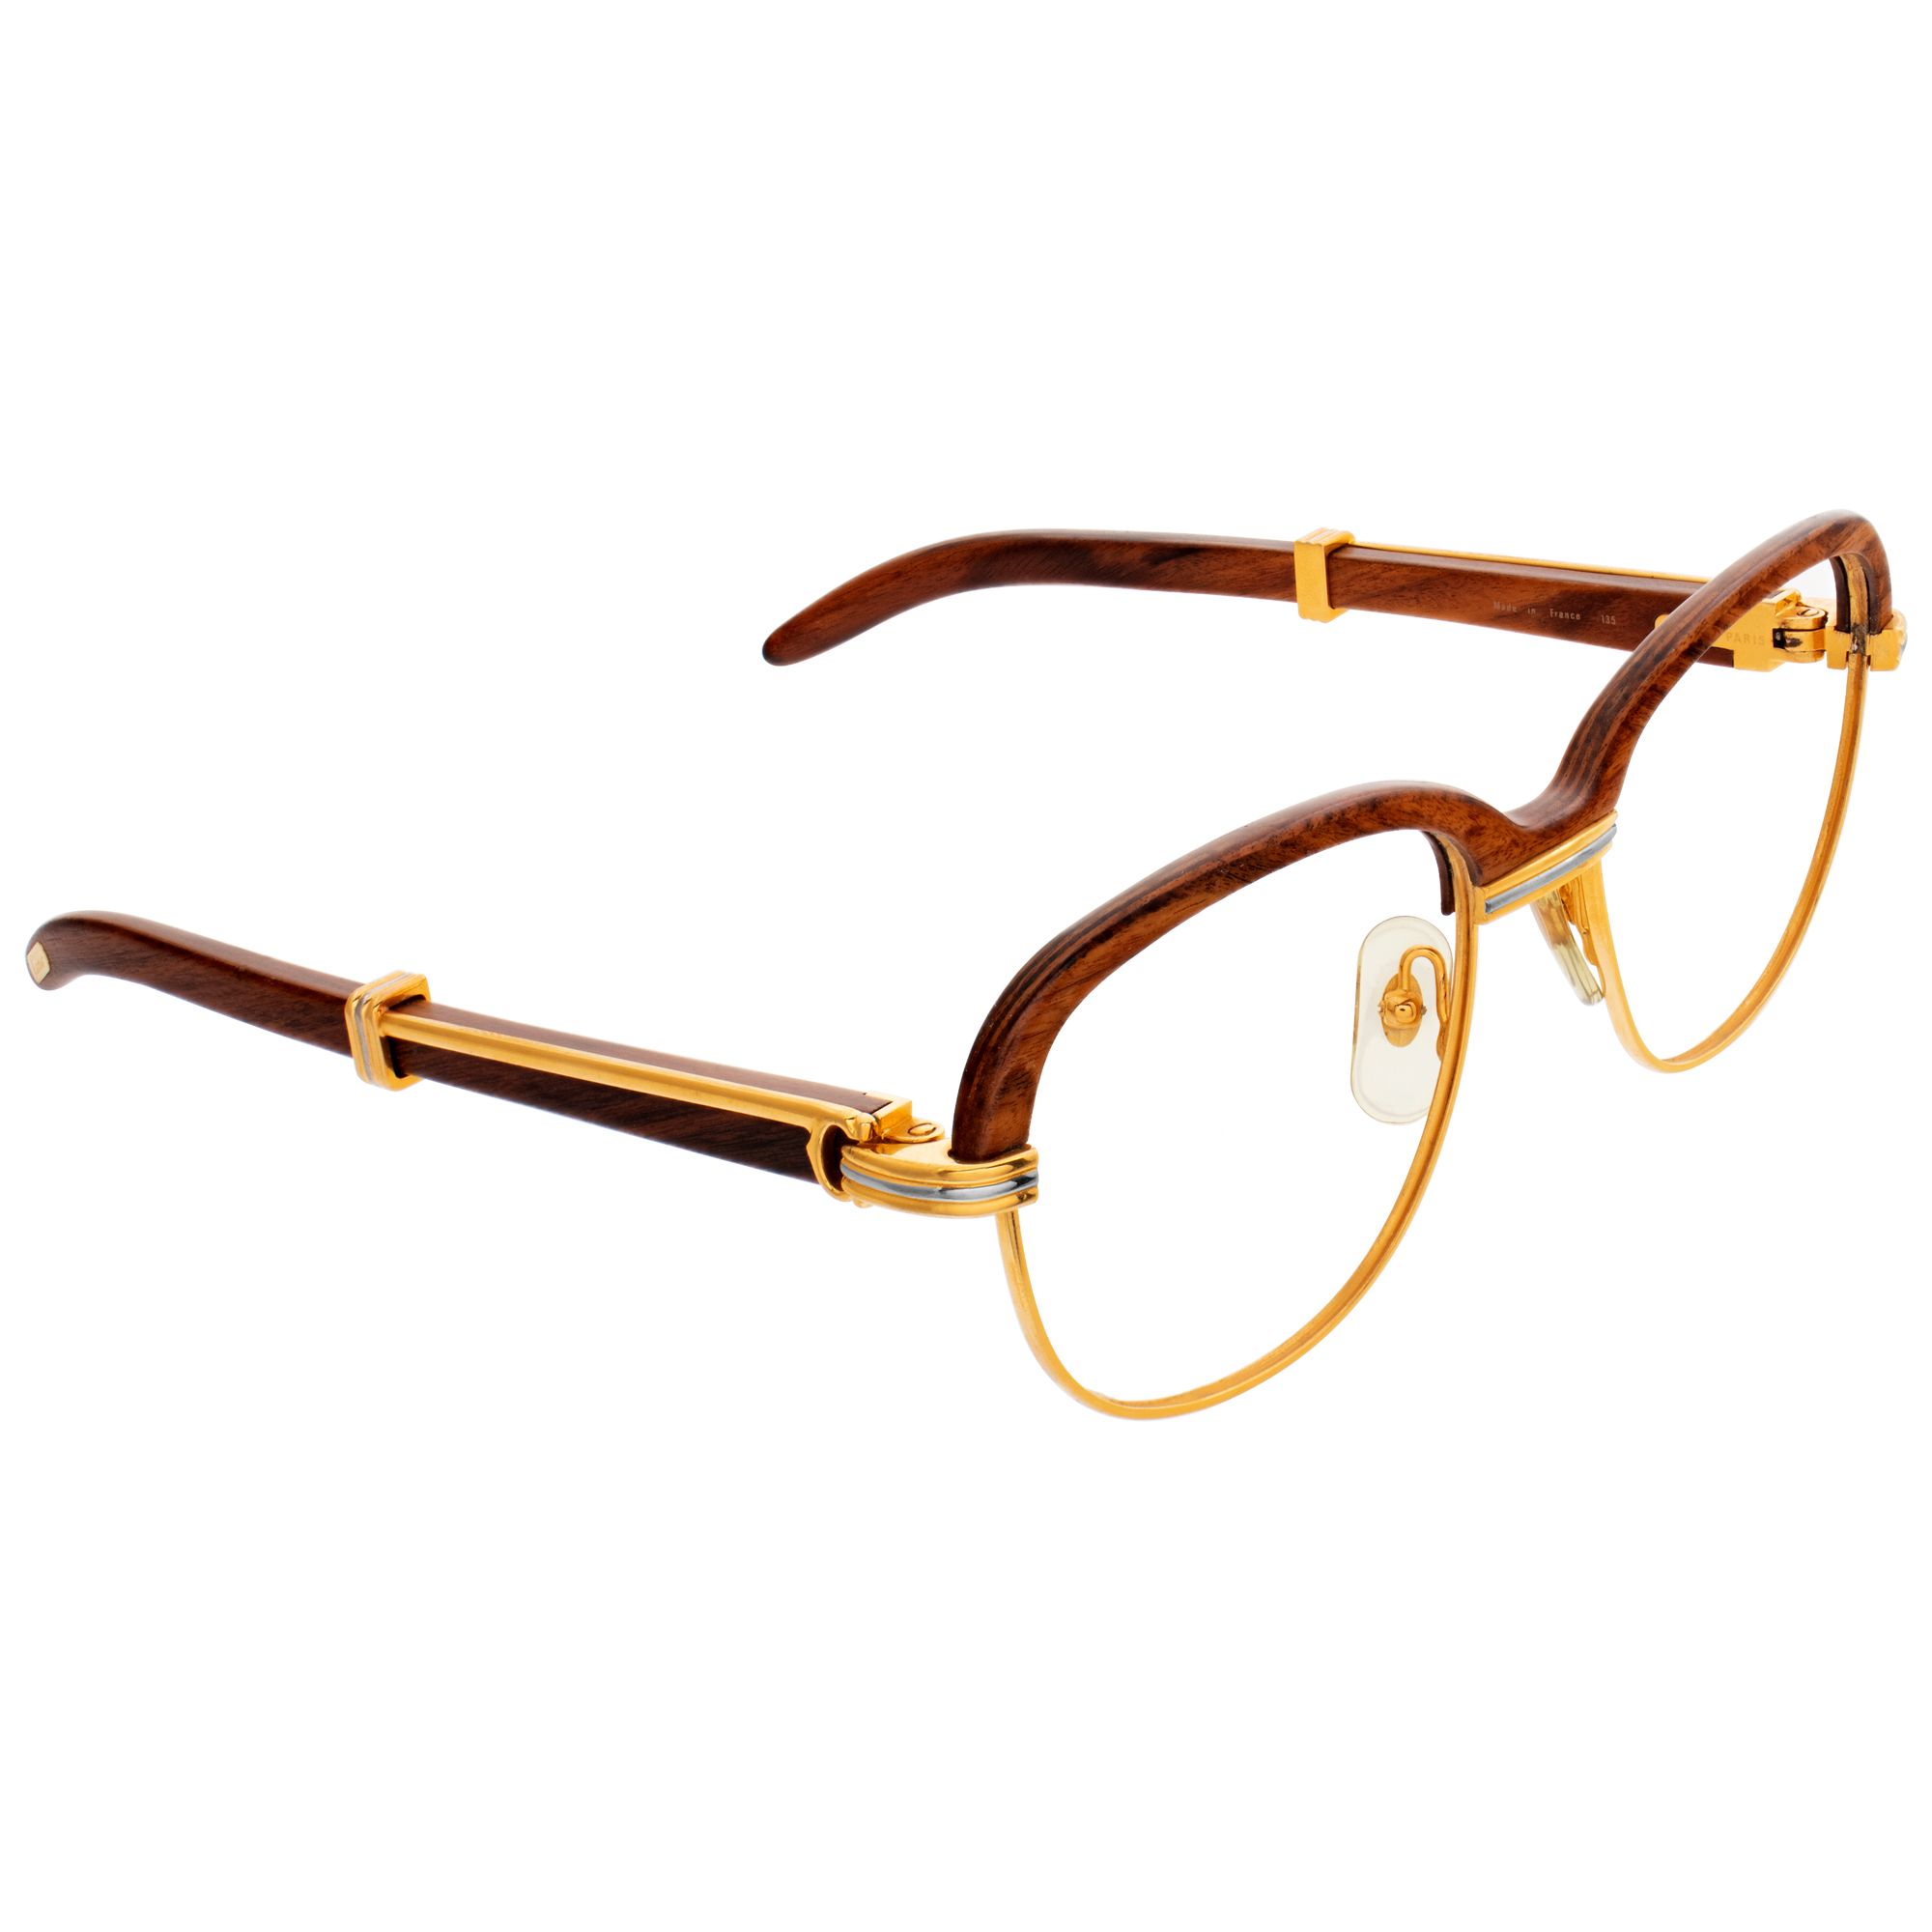 Cartier "Malmaison" collection, Palisander Rosewood & gold glasses. Circa 1990 image 2